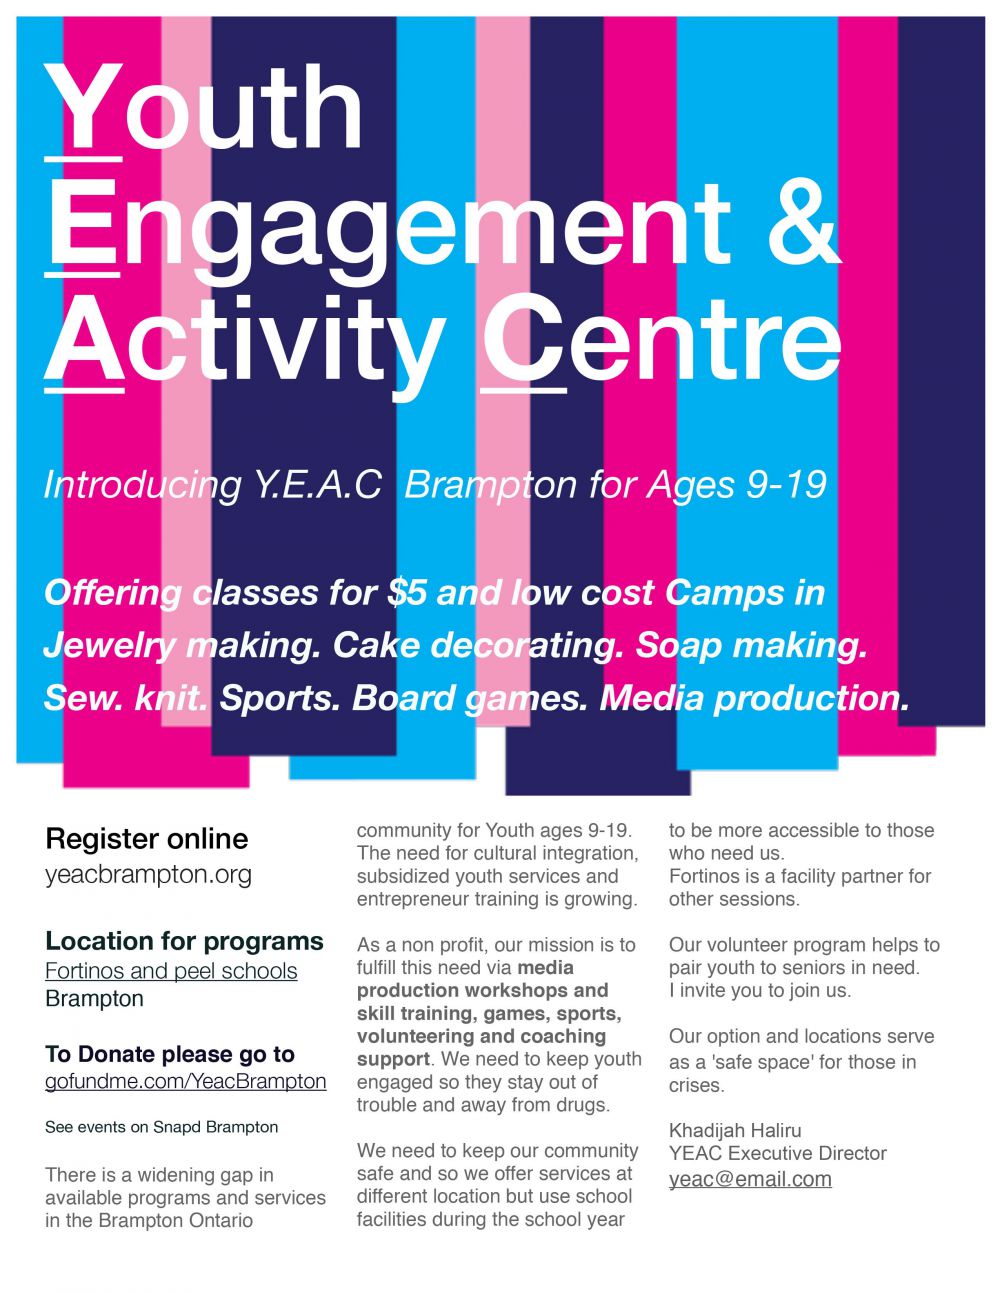 Youth Engagement & Activity Centre